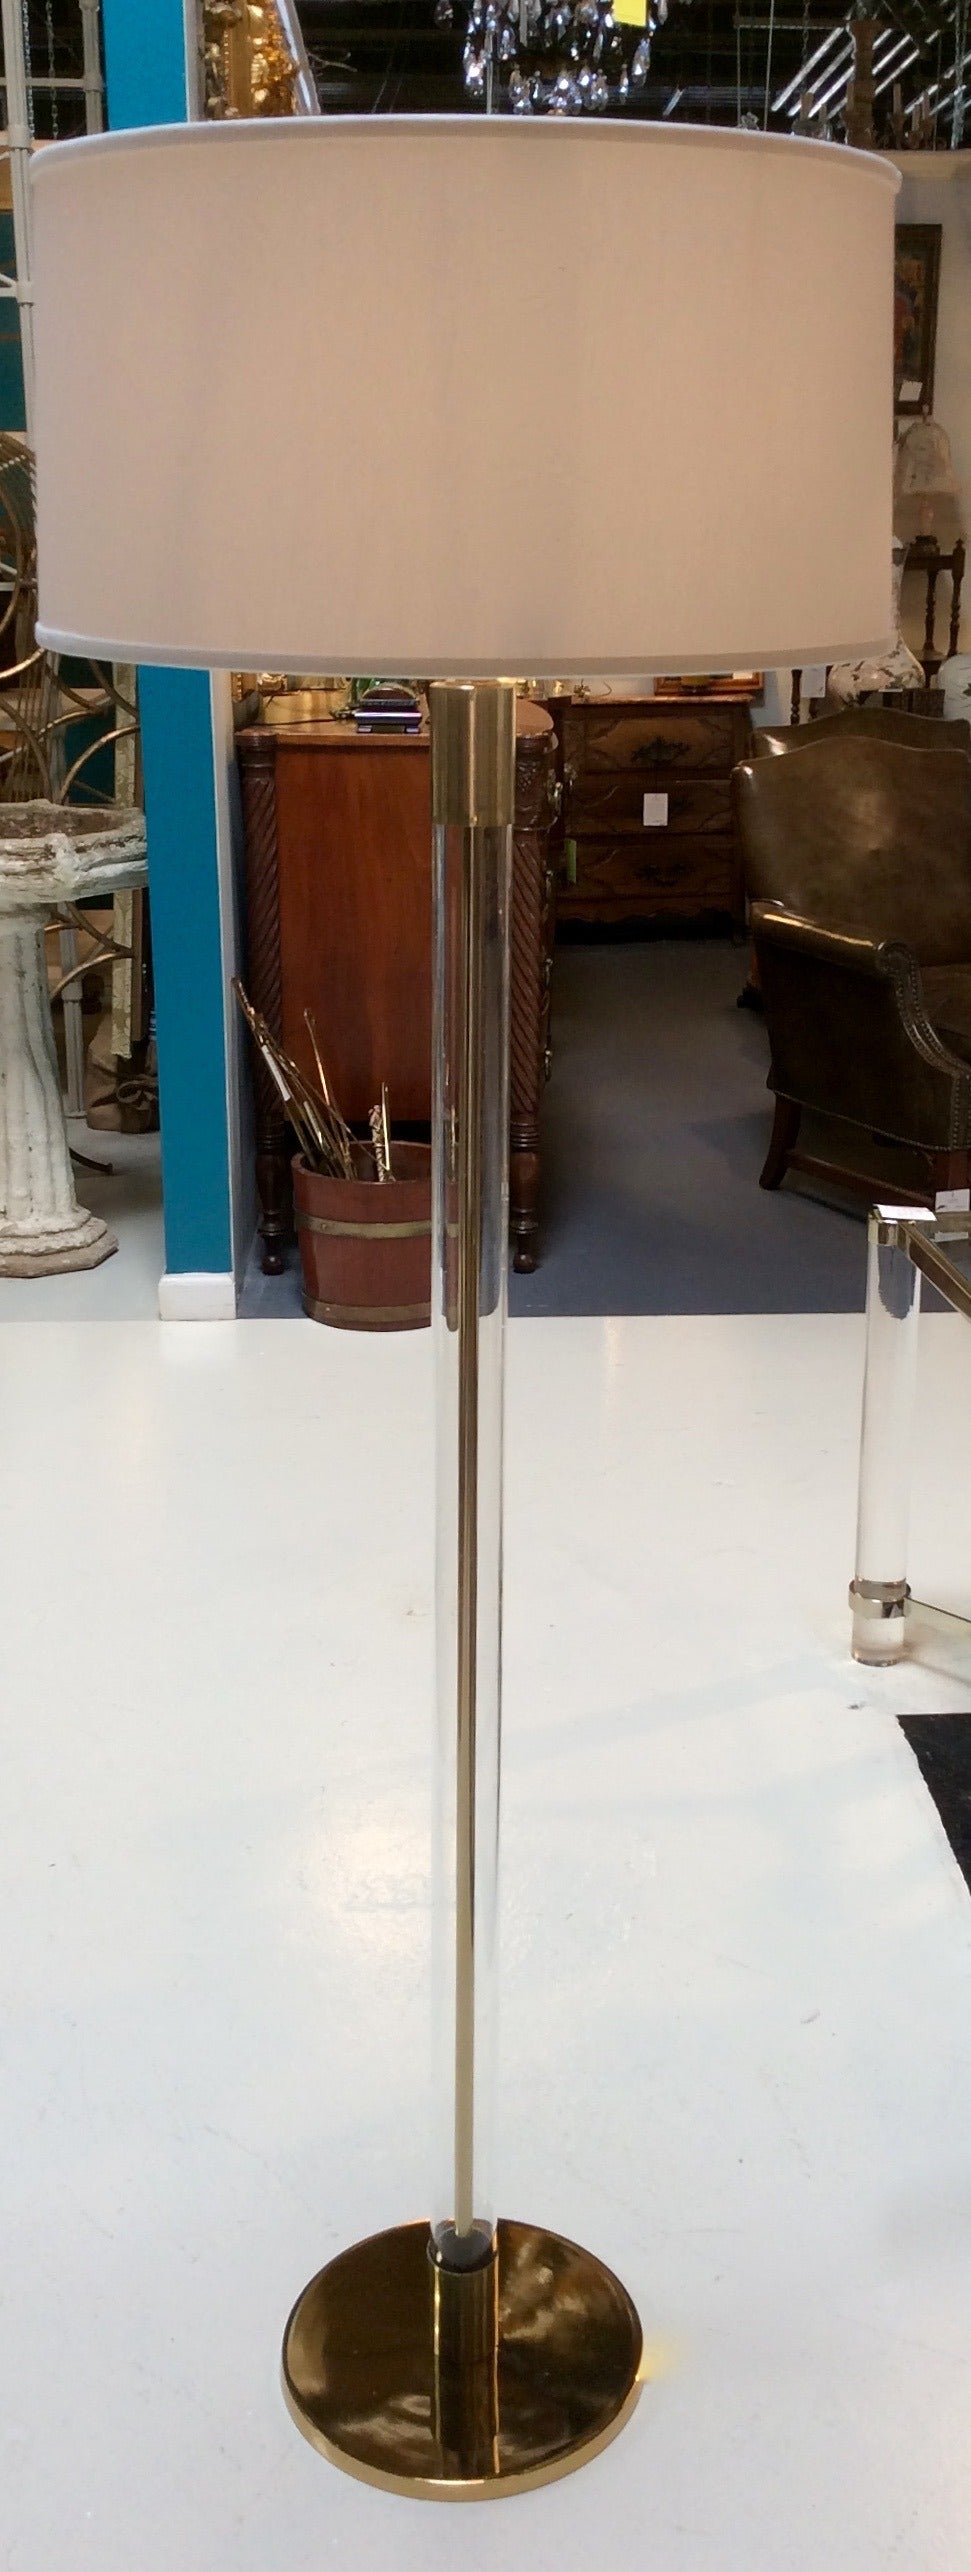 Fabulous vintage pair of glass and brass pole floor lamps, capped on either end with brass spacer and brass base.
Newly rewired and new sockets.
Manner of Hansen Lighting Co., NYC.